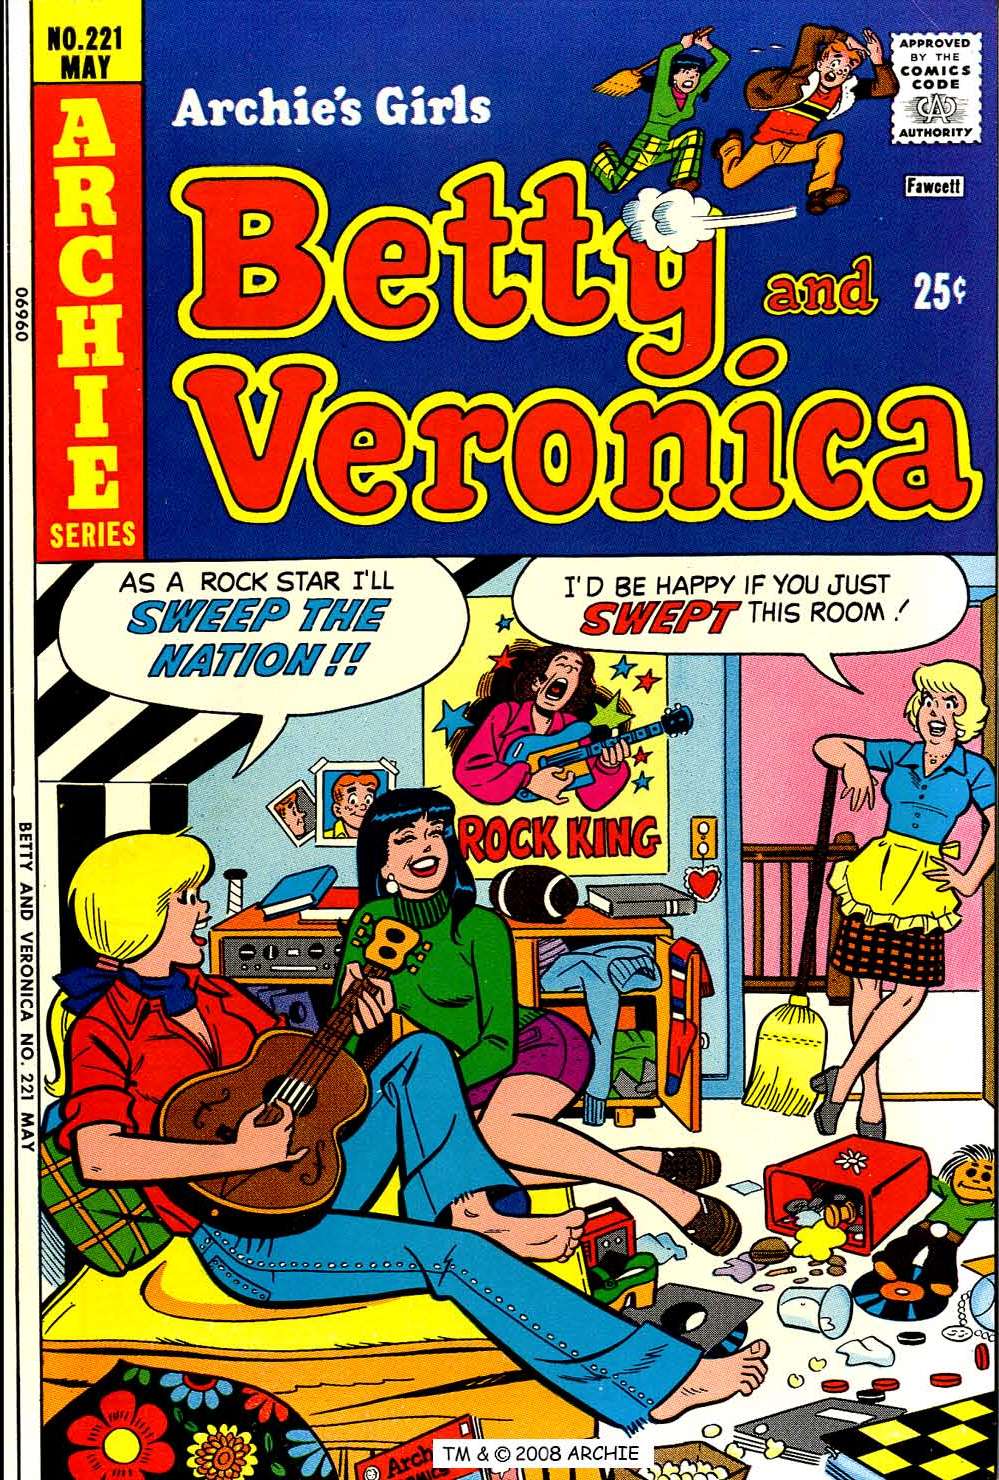 Read online Archie's Girls Betty and Veronica comic -  Issue #221 - 1